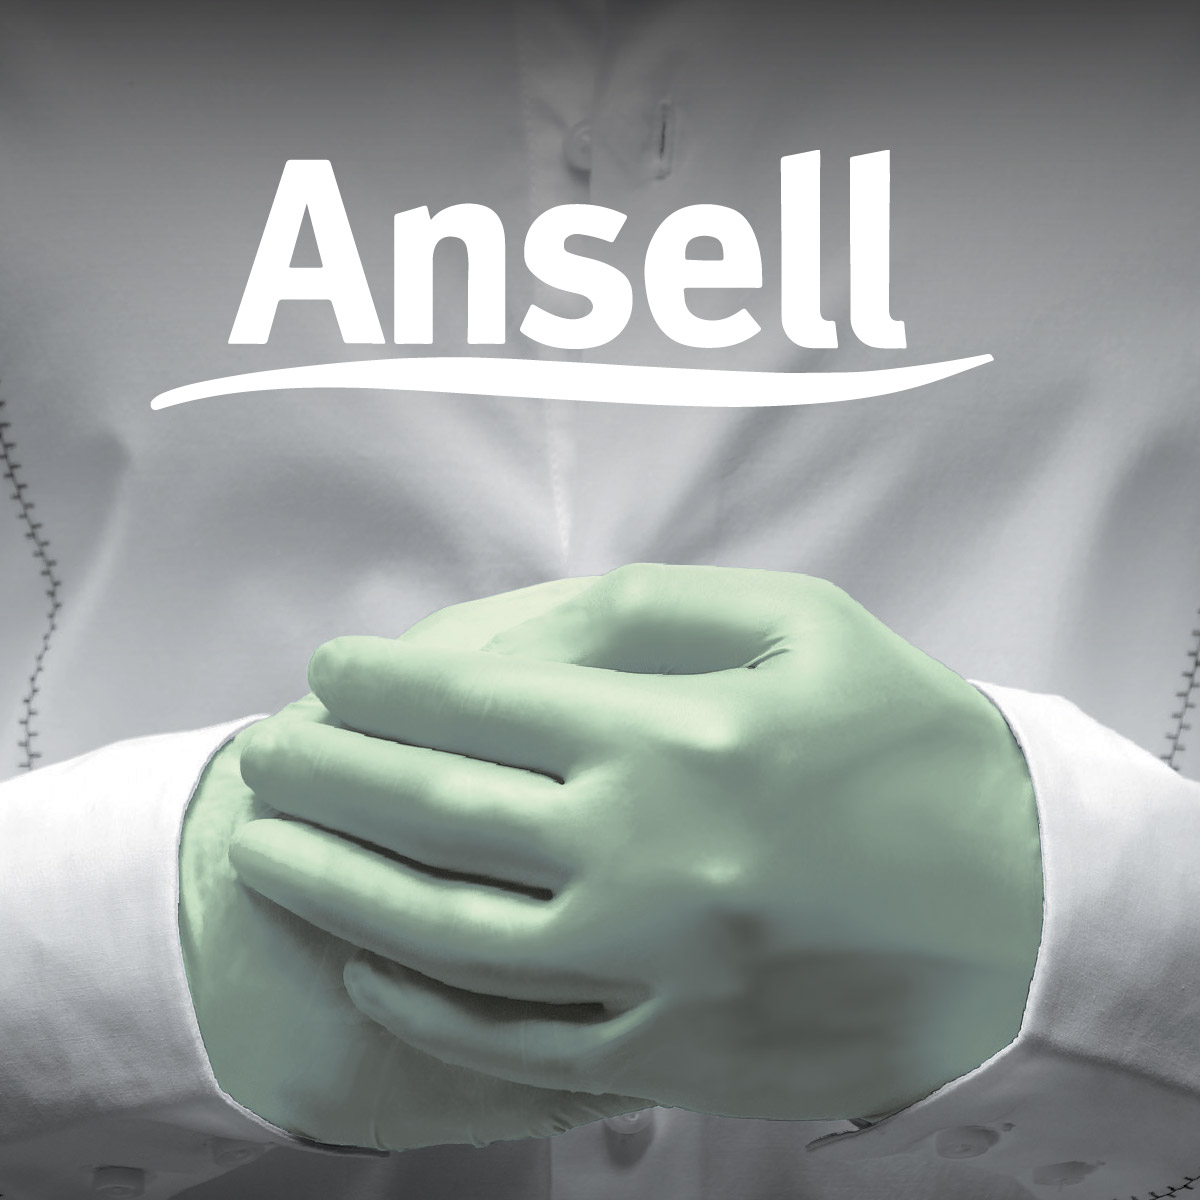 Ansell Gloves Health & Beauty Packaging Design